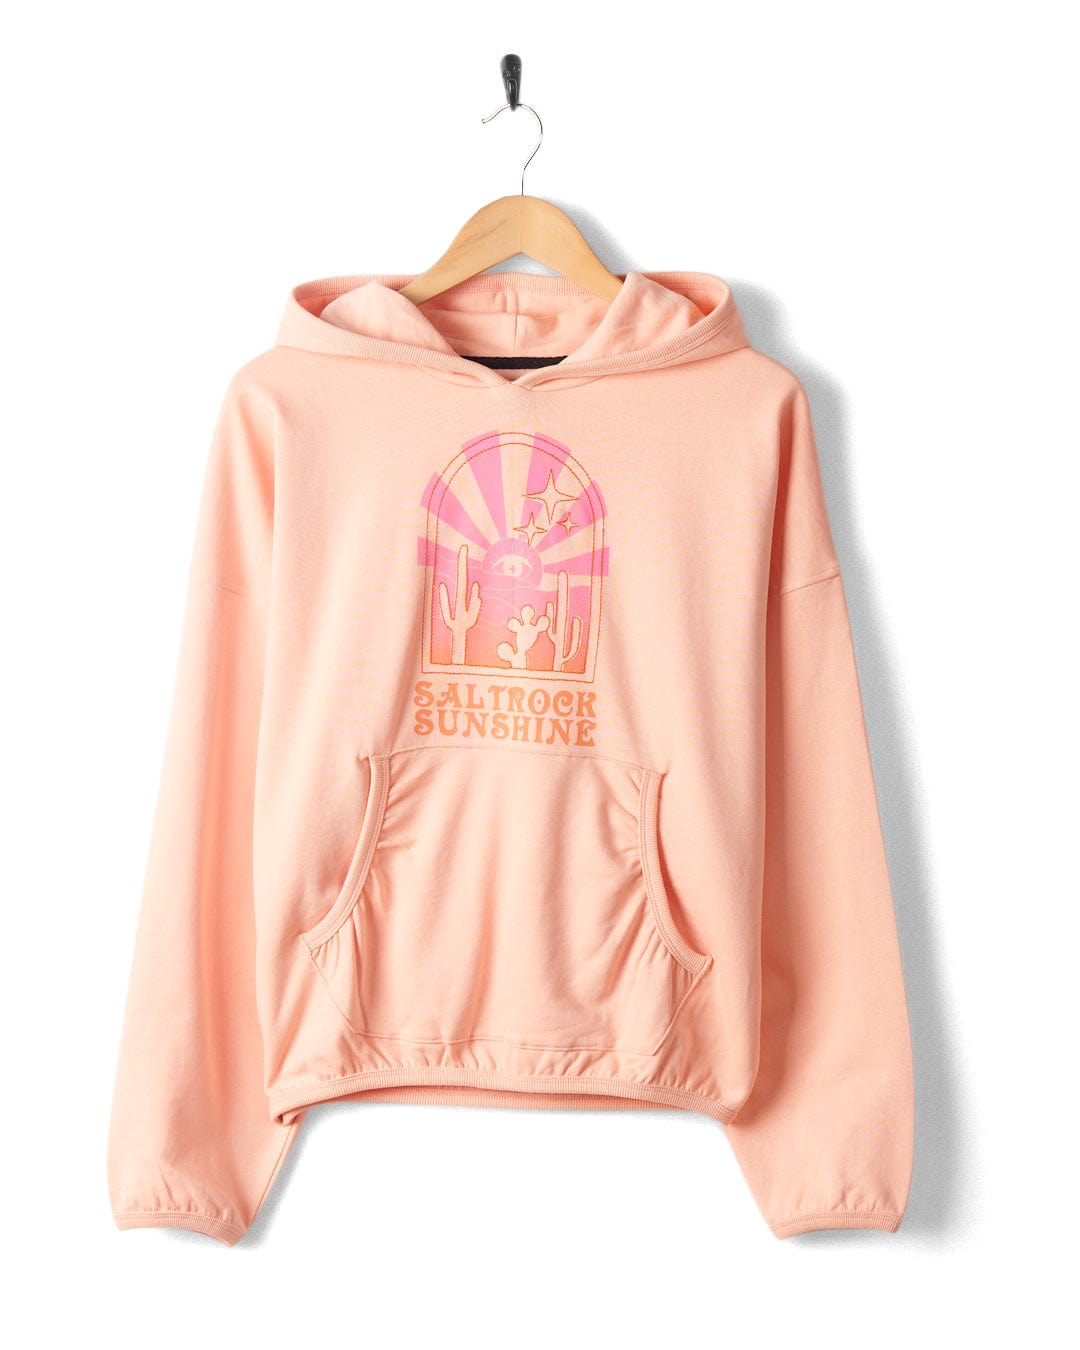 Light pink hoodie with a front pocket, showcasing a graphic design of a desert scene with cacti and a sun, under the text "Saltrock Sunshine". The Saltrock Sunshine - Womens Pop Hood - Peach from Saltrock is made from 100% cotton for ultimate comfort.